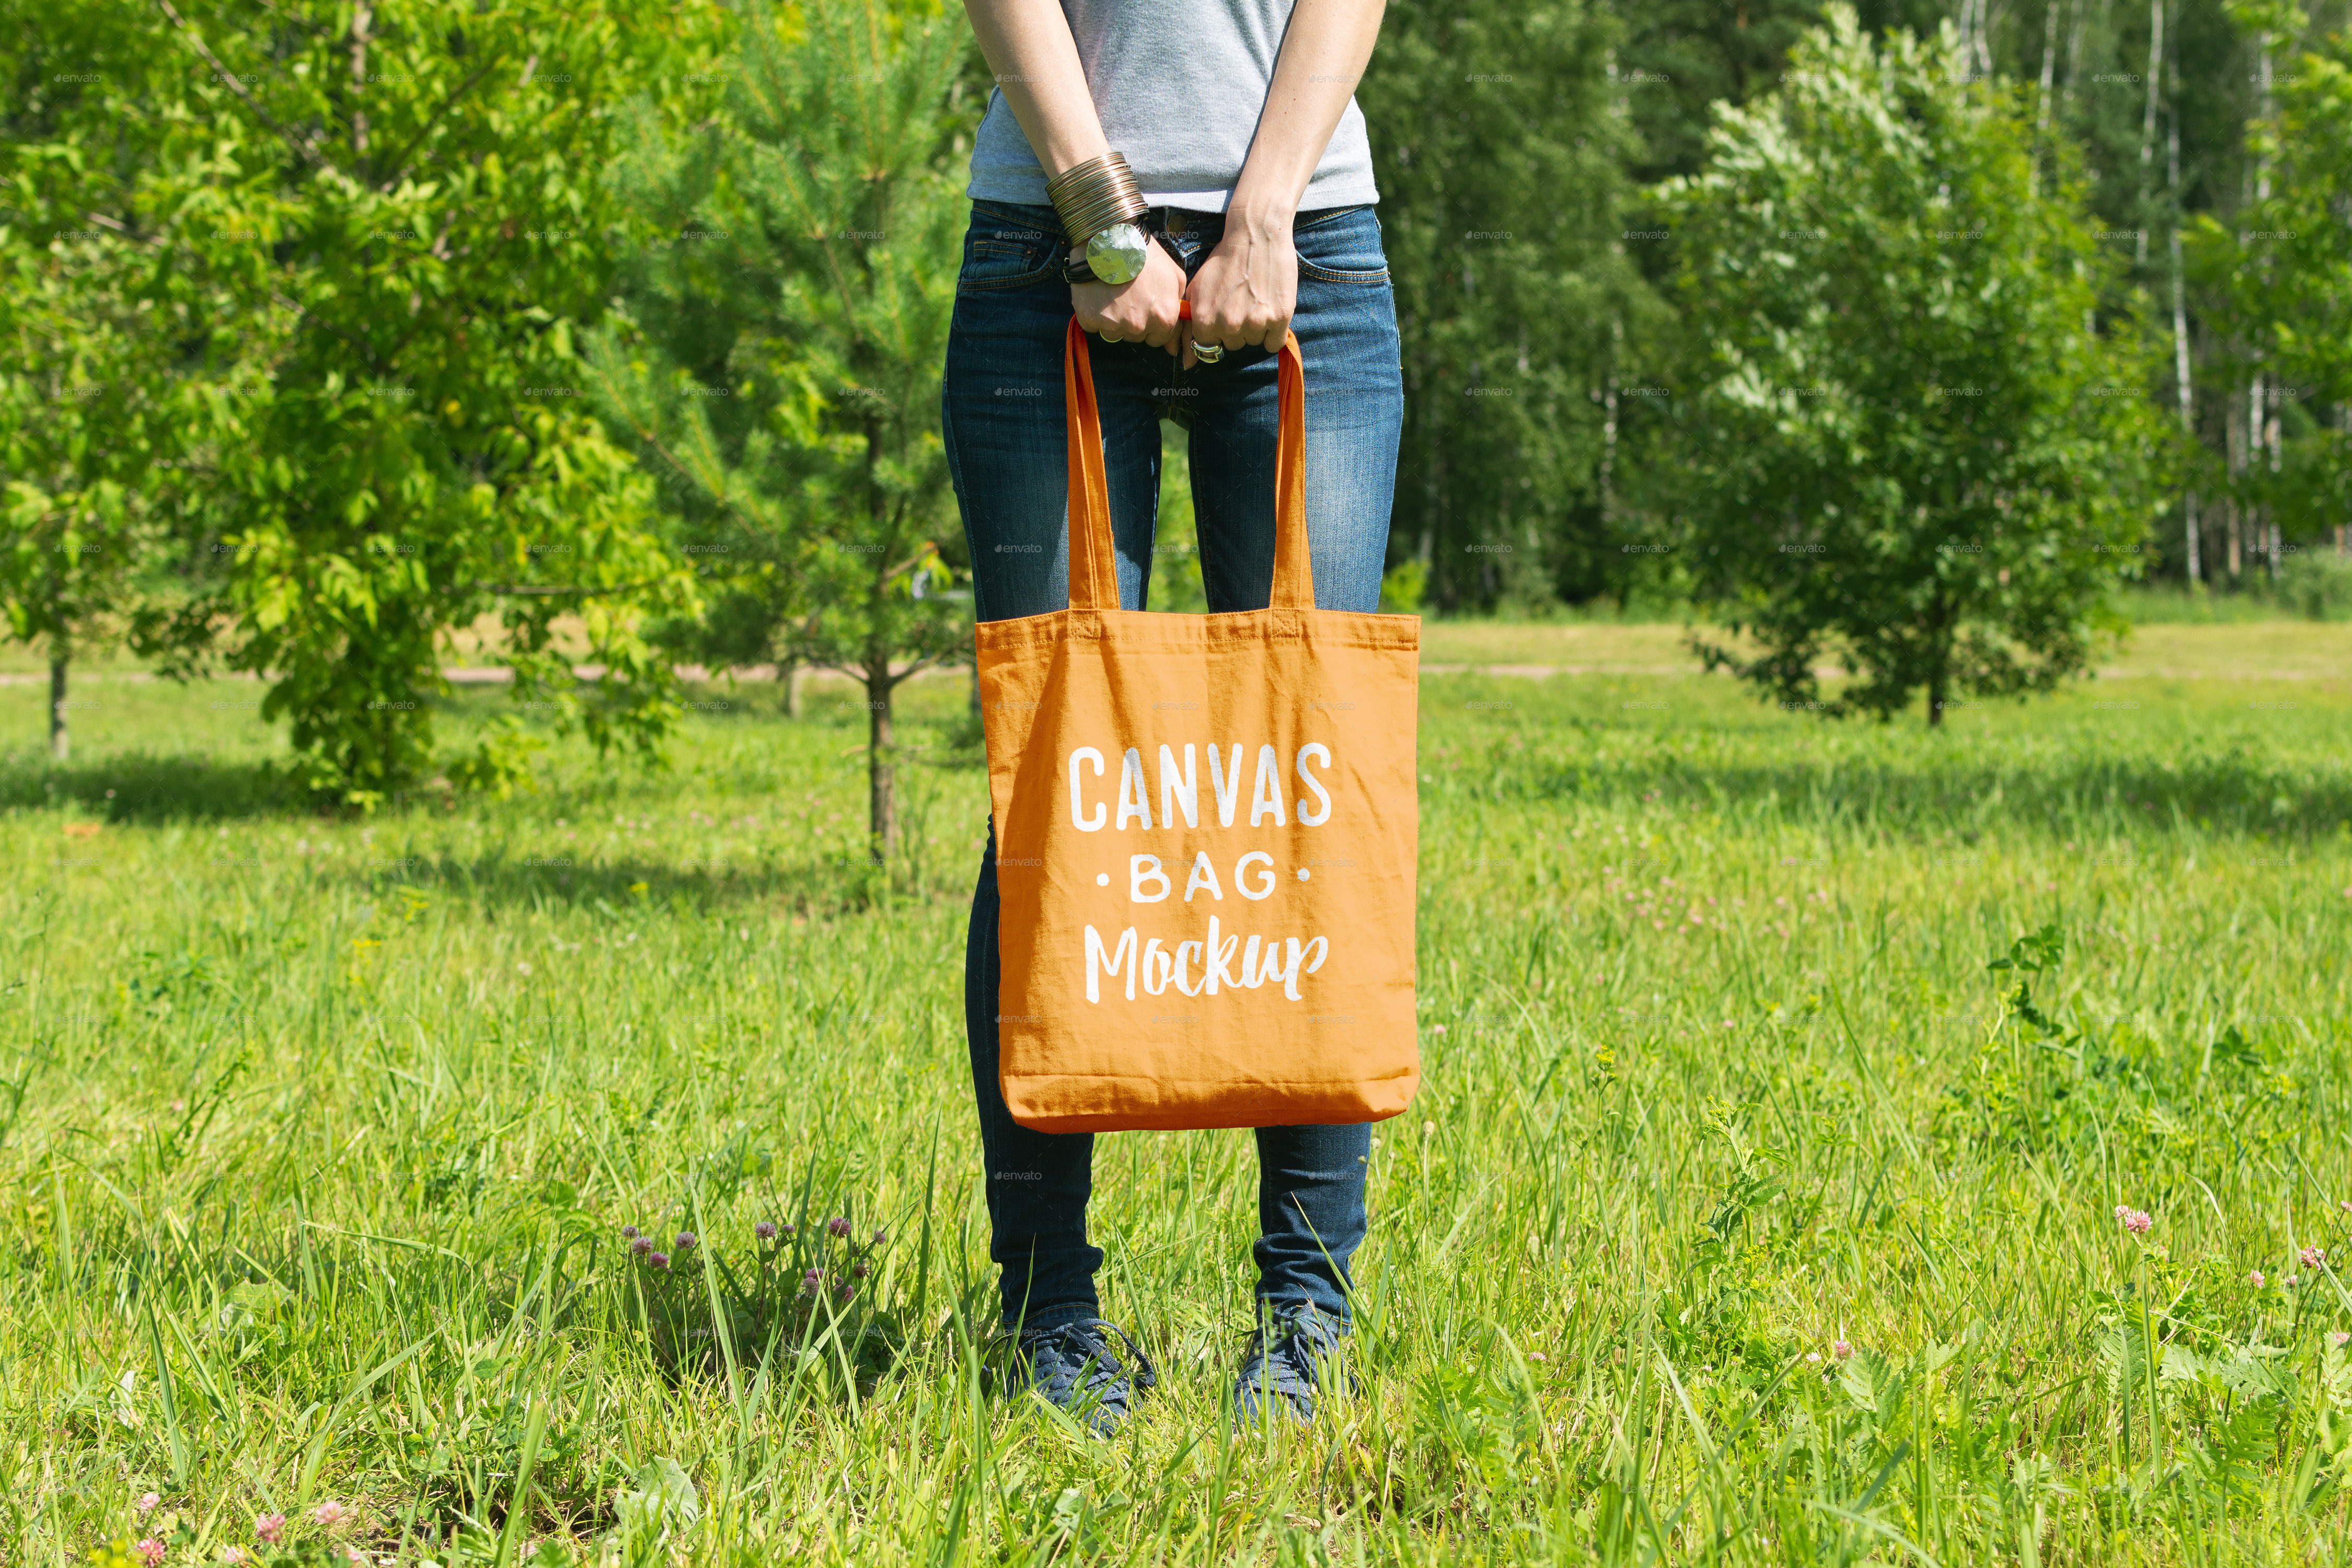 Download Canvas Bag Mockup by bulbfish | GraphicRiver